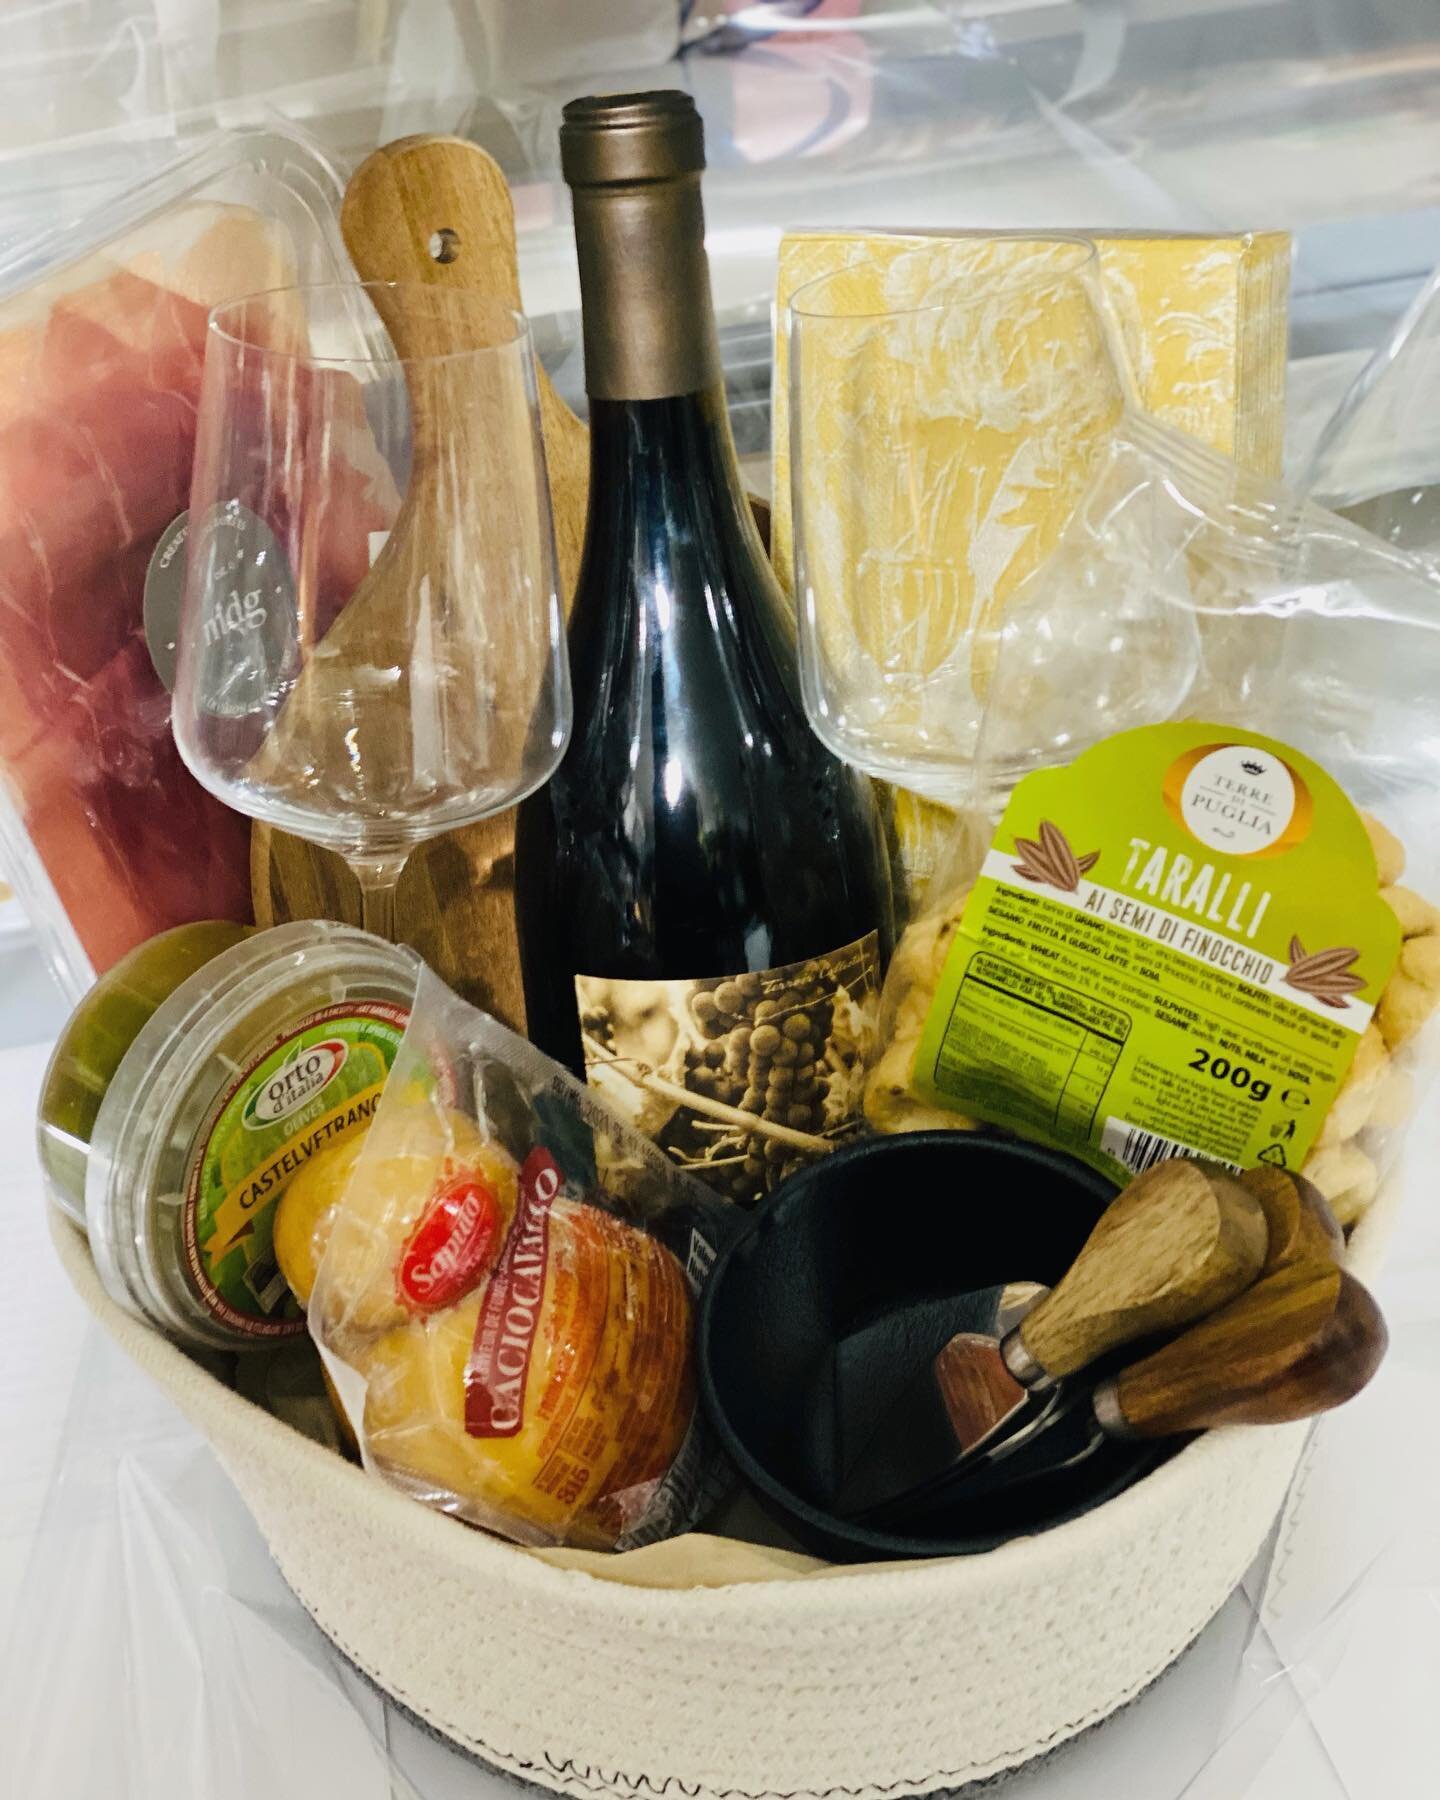 This basket would make the perfect housewarming gift for a friend!

It has everything they could want for a charcuterie board!
.
.
.
.
#giftbasket #giftbaskets #giftideas #gourmetgiftbaskets #giftbasketsforalloccasions #customizedgiftbasket #customiz